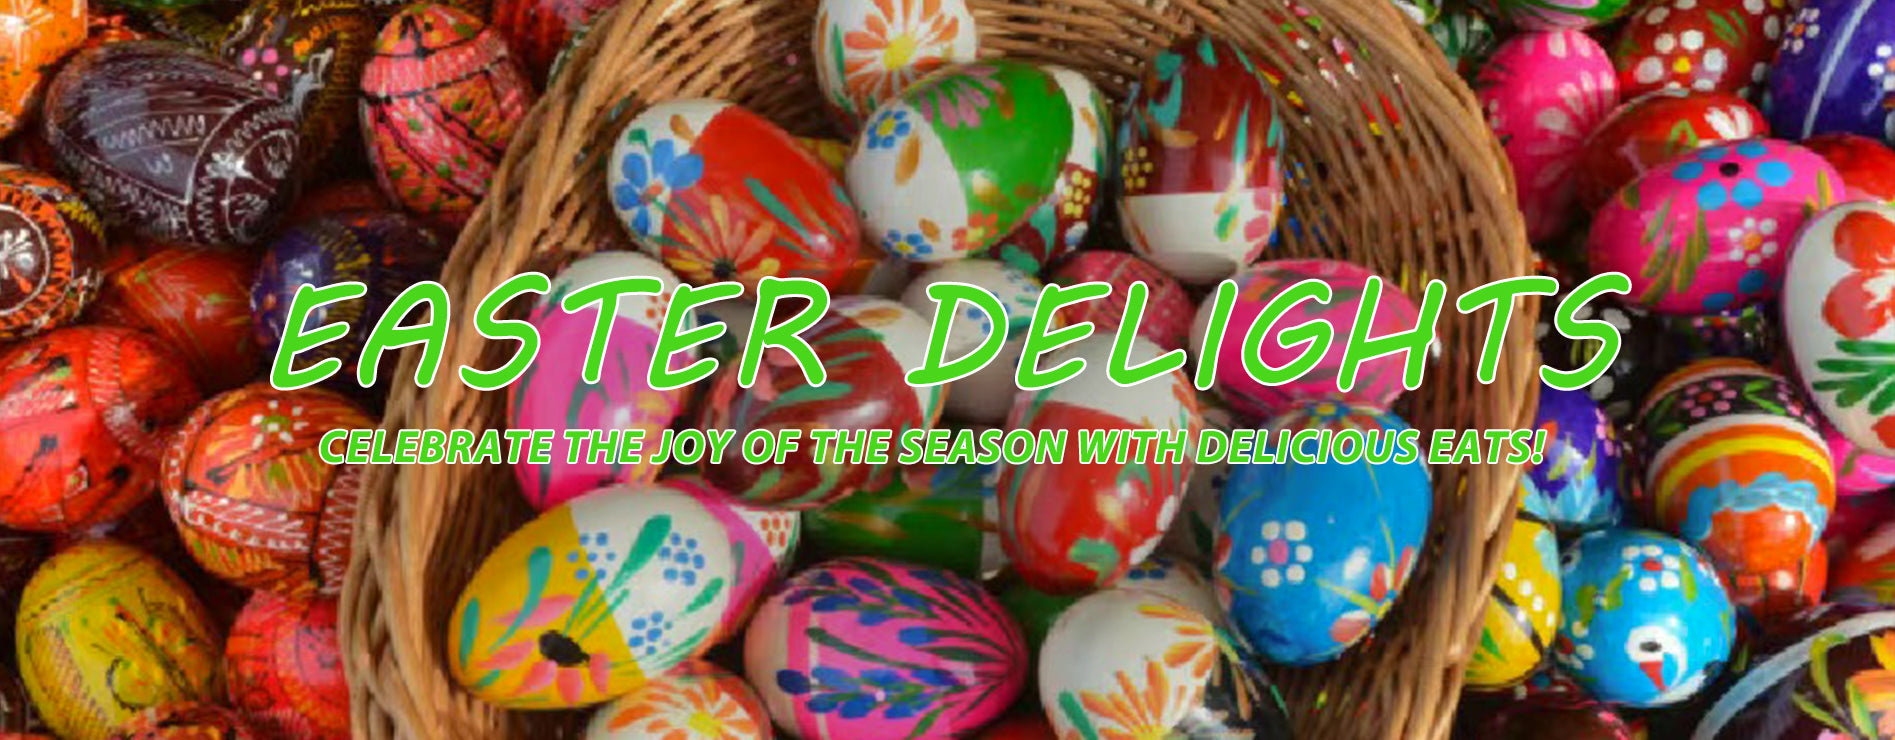 Easter Delights: Celebrate the Joy of the Season with Delicious Eats!